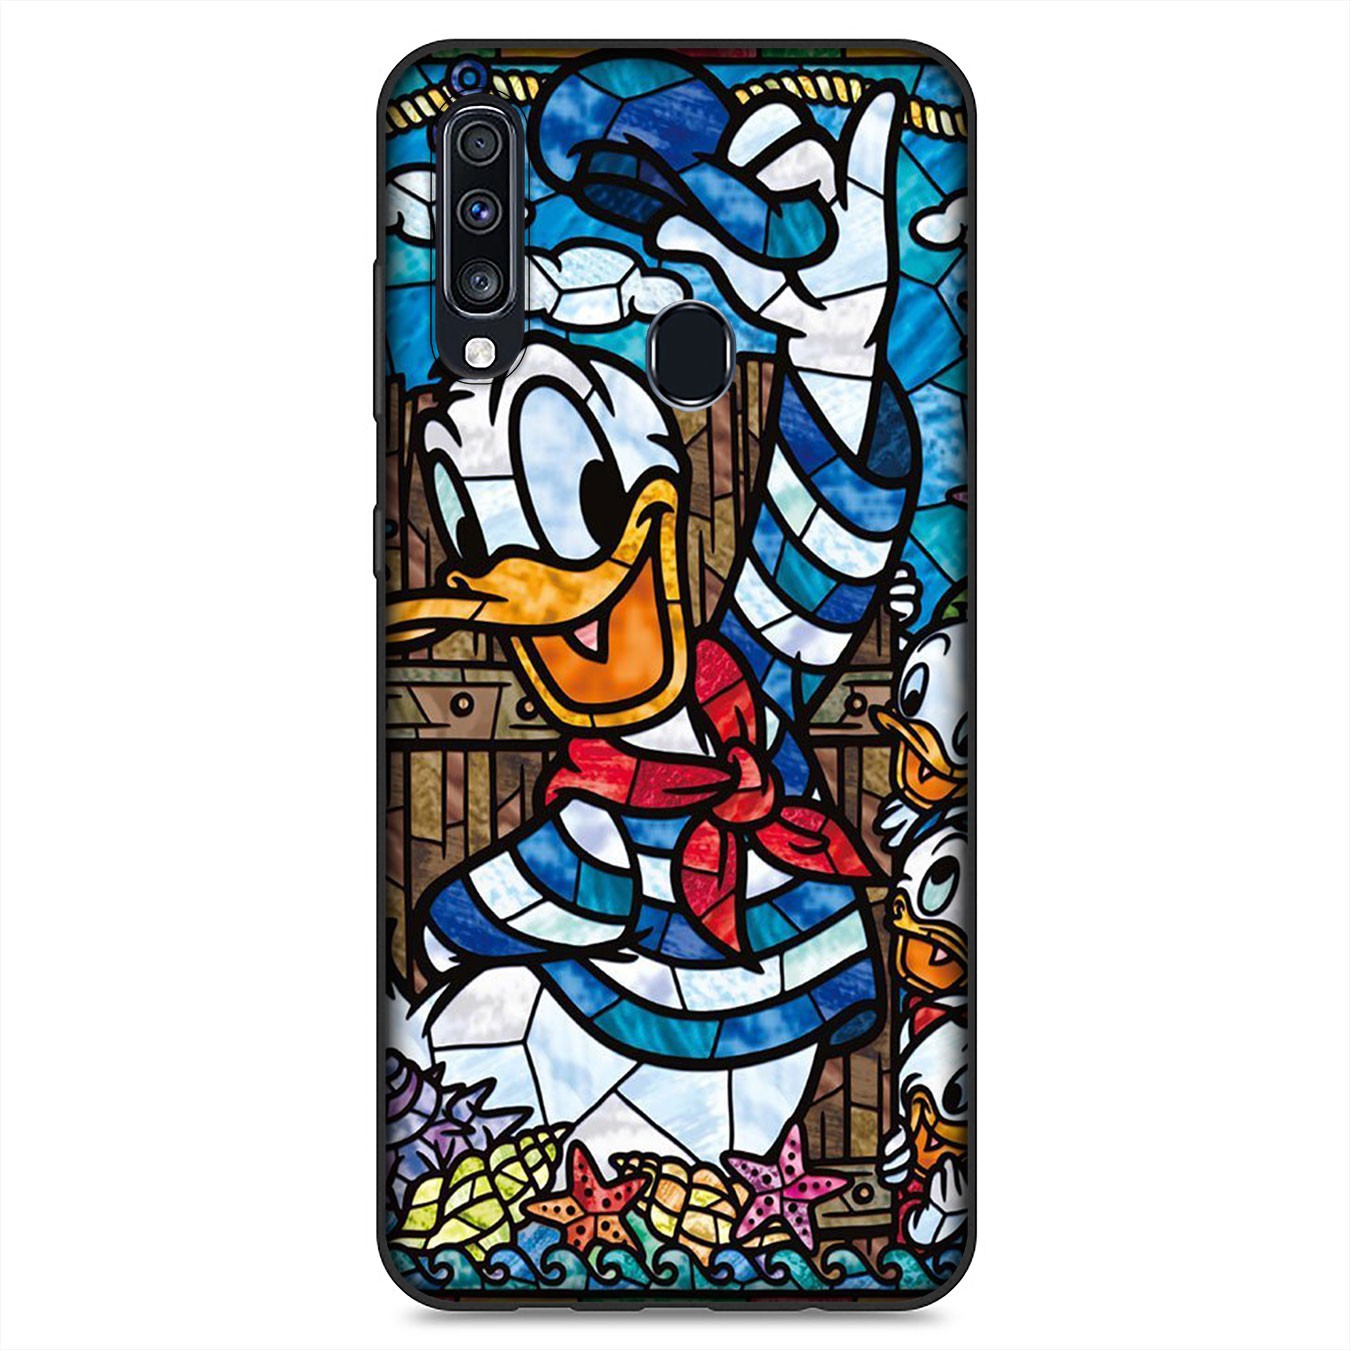 Samsung Galaxy S21 Ultra S8 Plus F62 M62 A2 A32 A52 A72 S21+ S8+ S21Plus Casing Soft Silicone Phone Case Mickey Mouse Stitch Cover